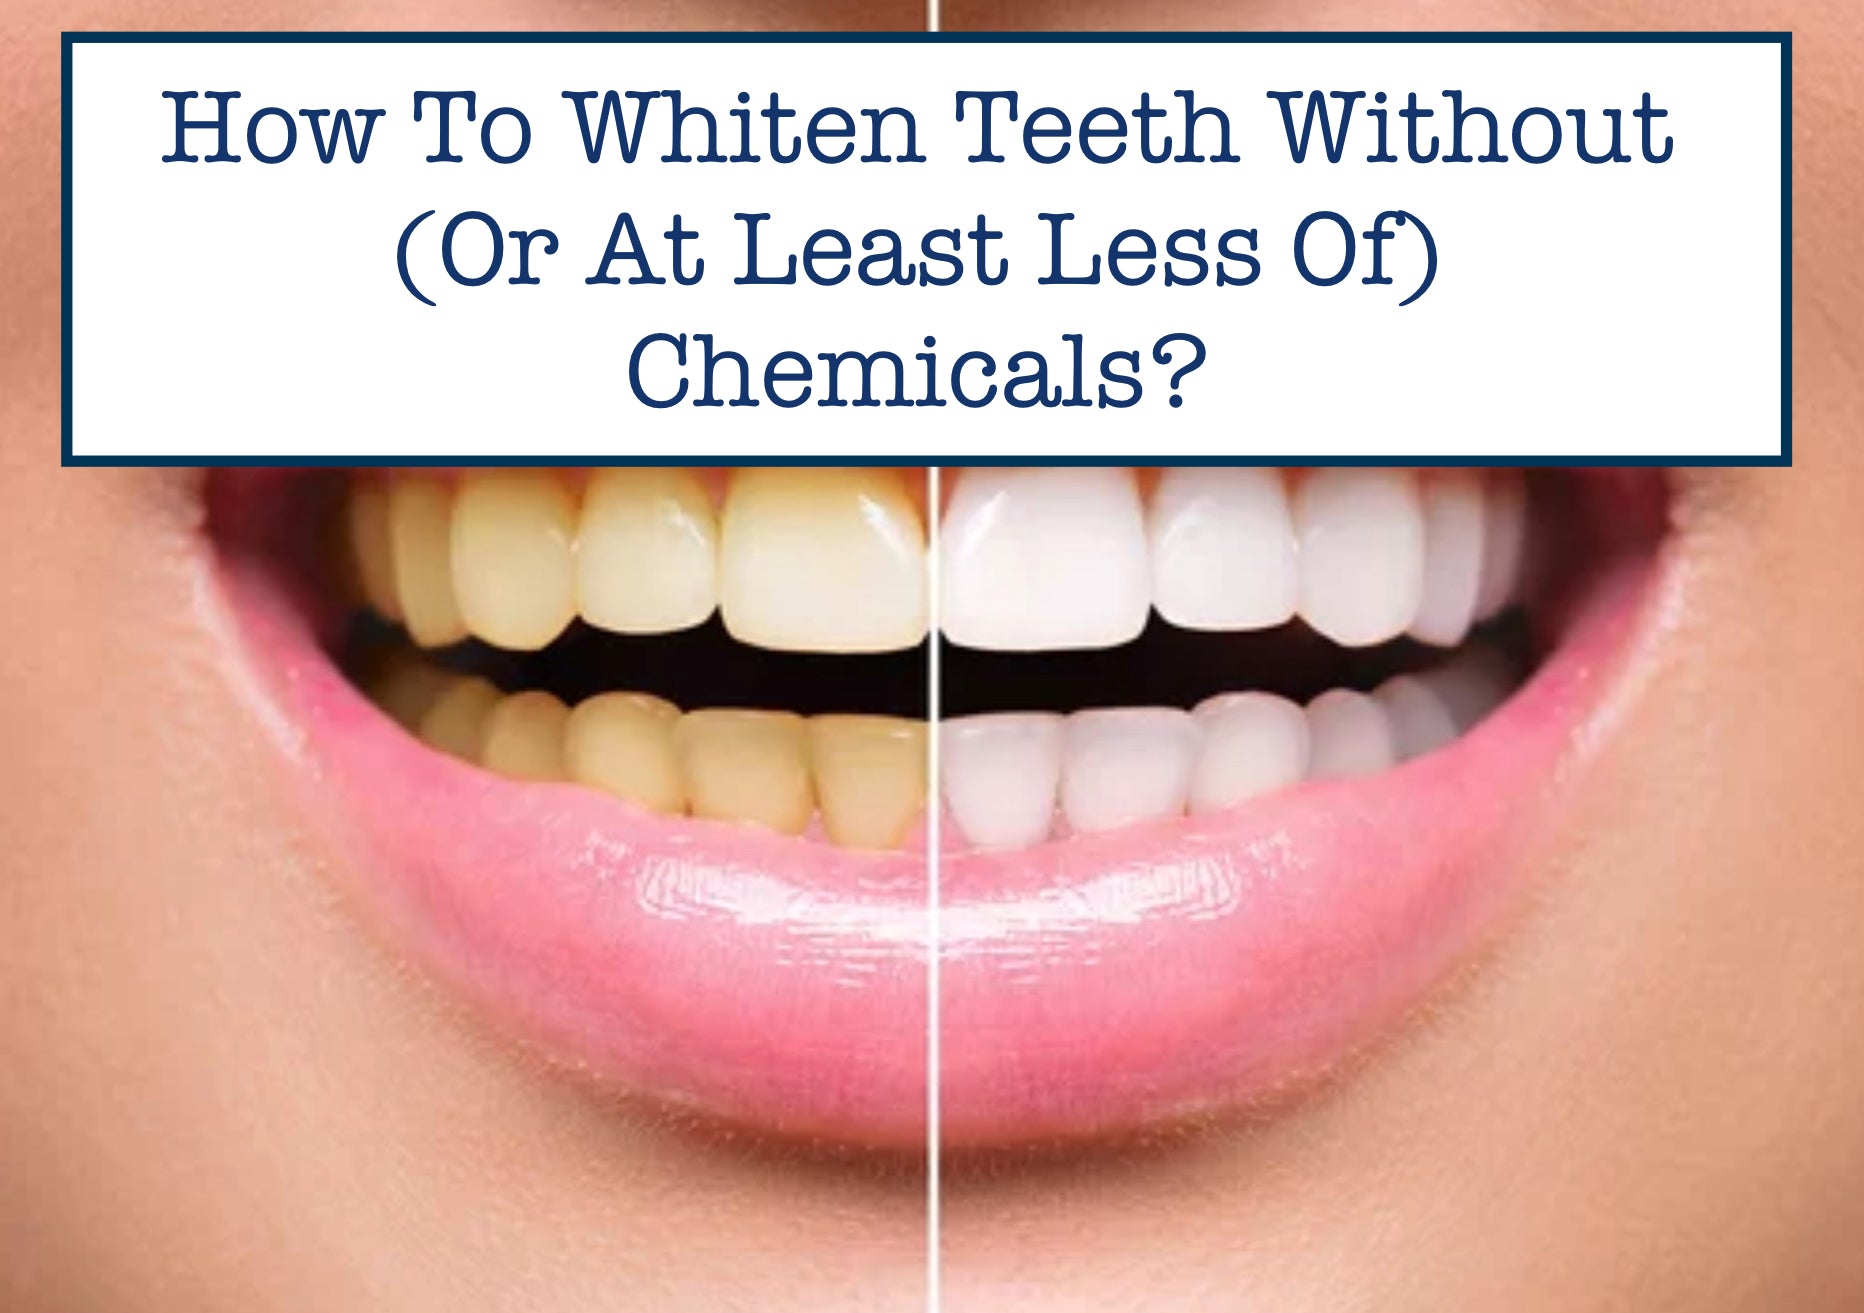 How To Whiten Teeth Without (Or At Least Less Of) Chemicals?